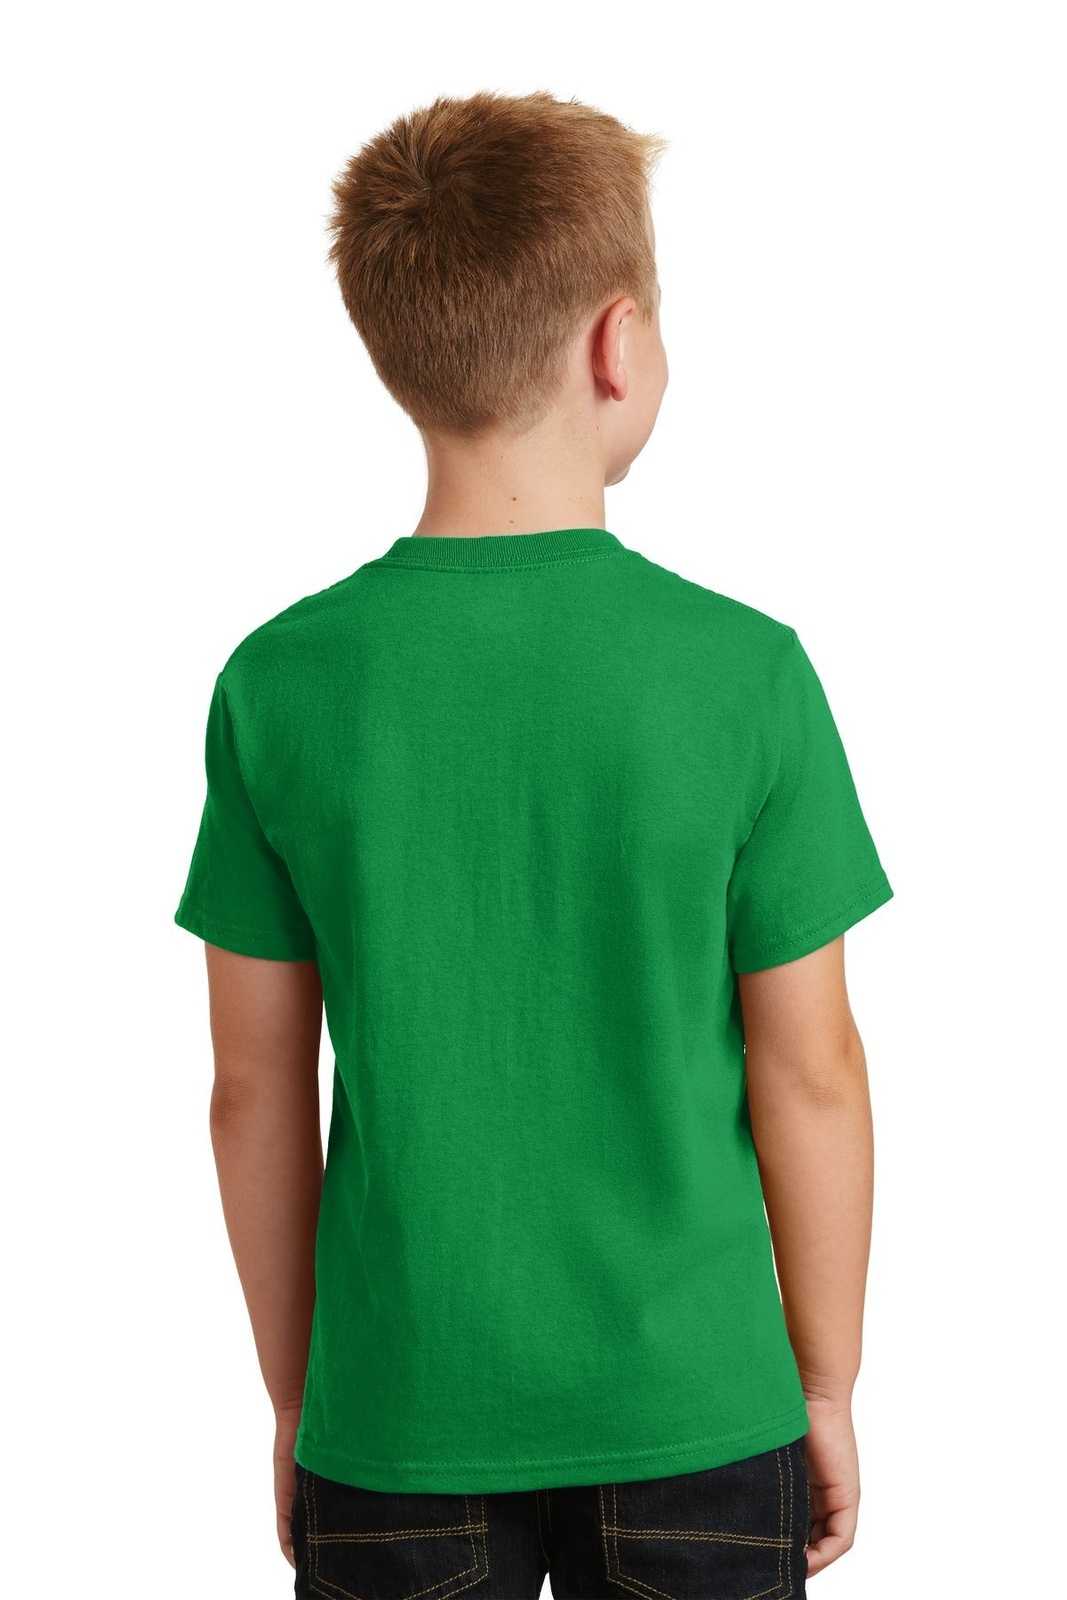 Port & Company PC54Y Youth Core Cotton Tee - Clover Green - HIT a Double - 1